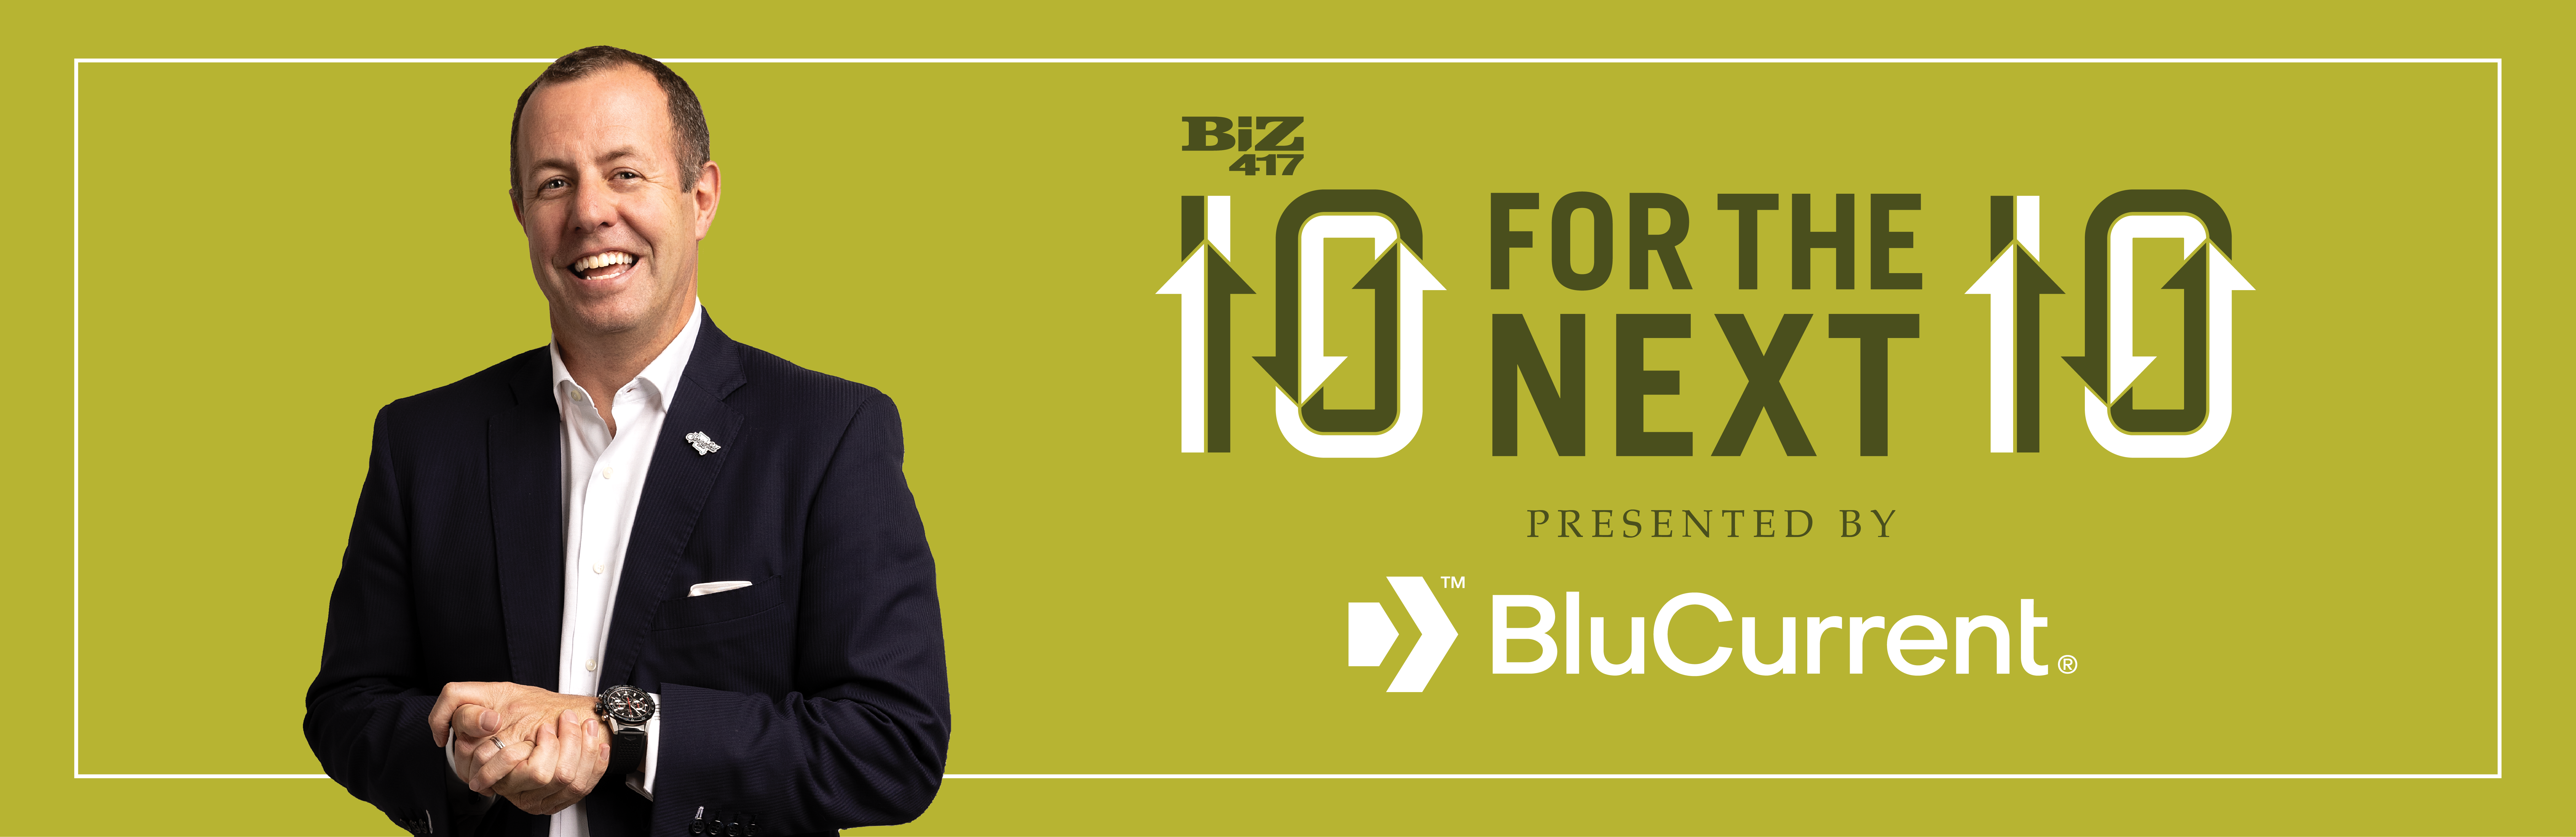 Biz 417's 10 for the Next 10 Nominations